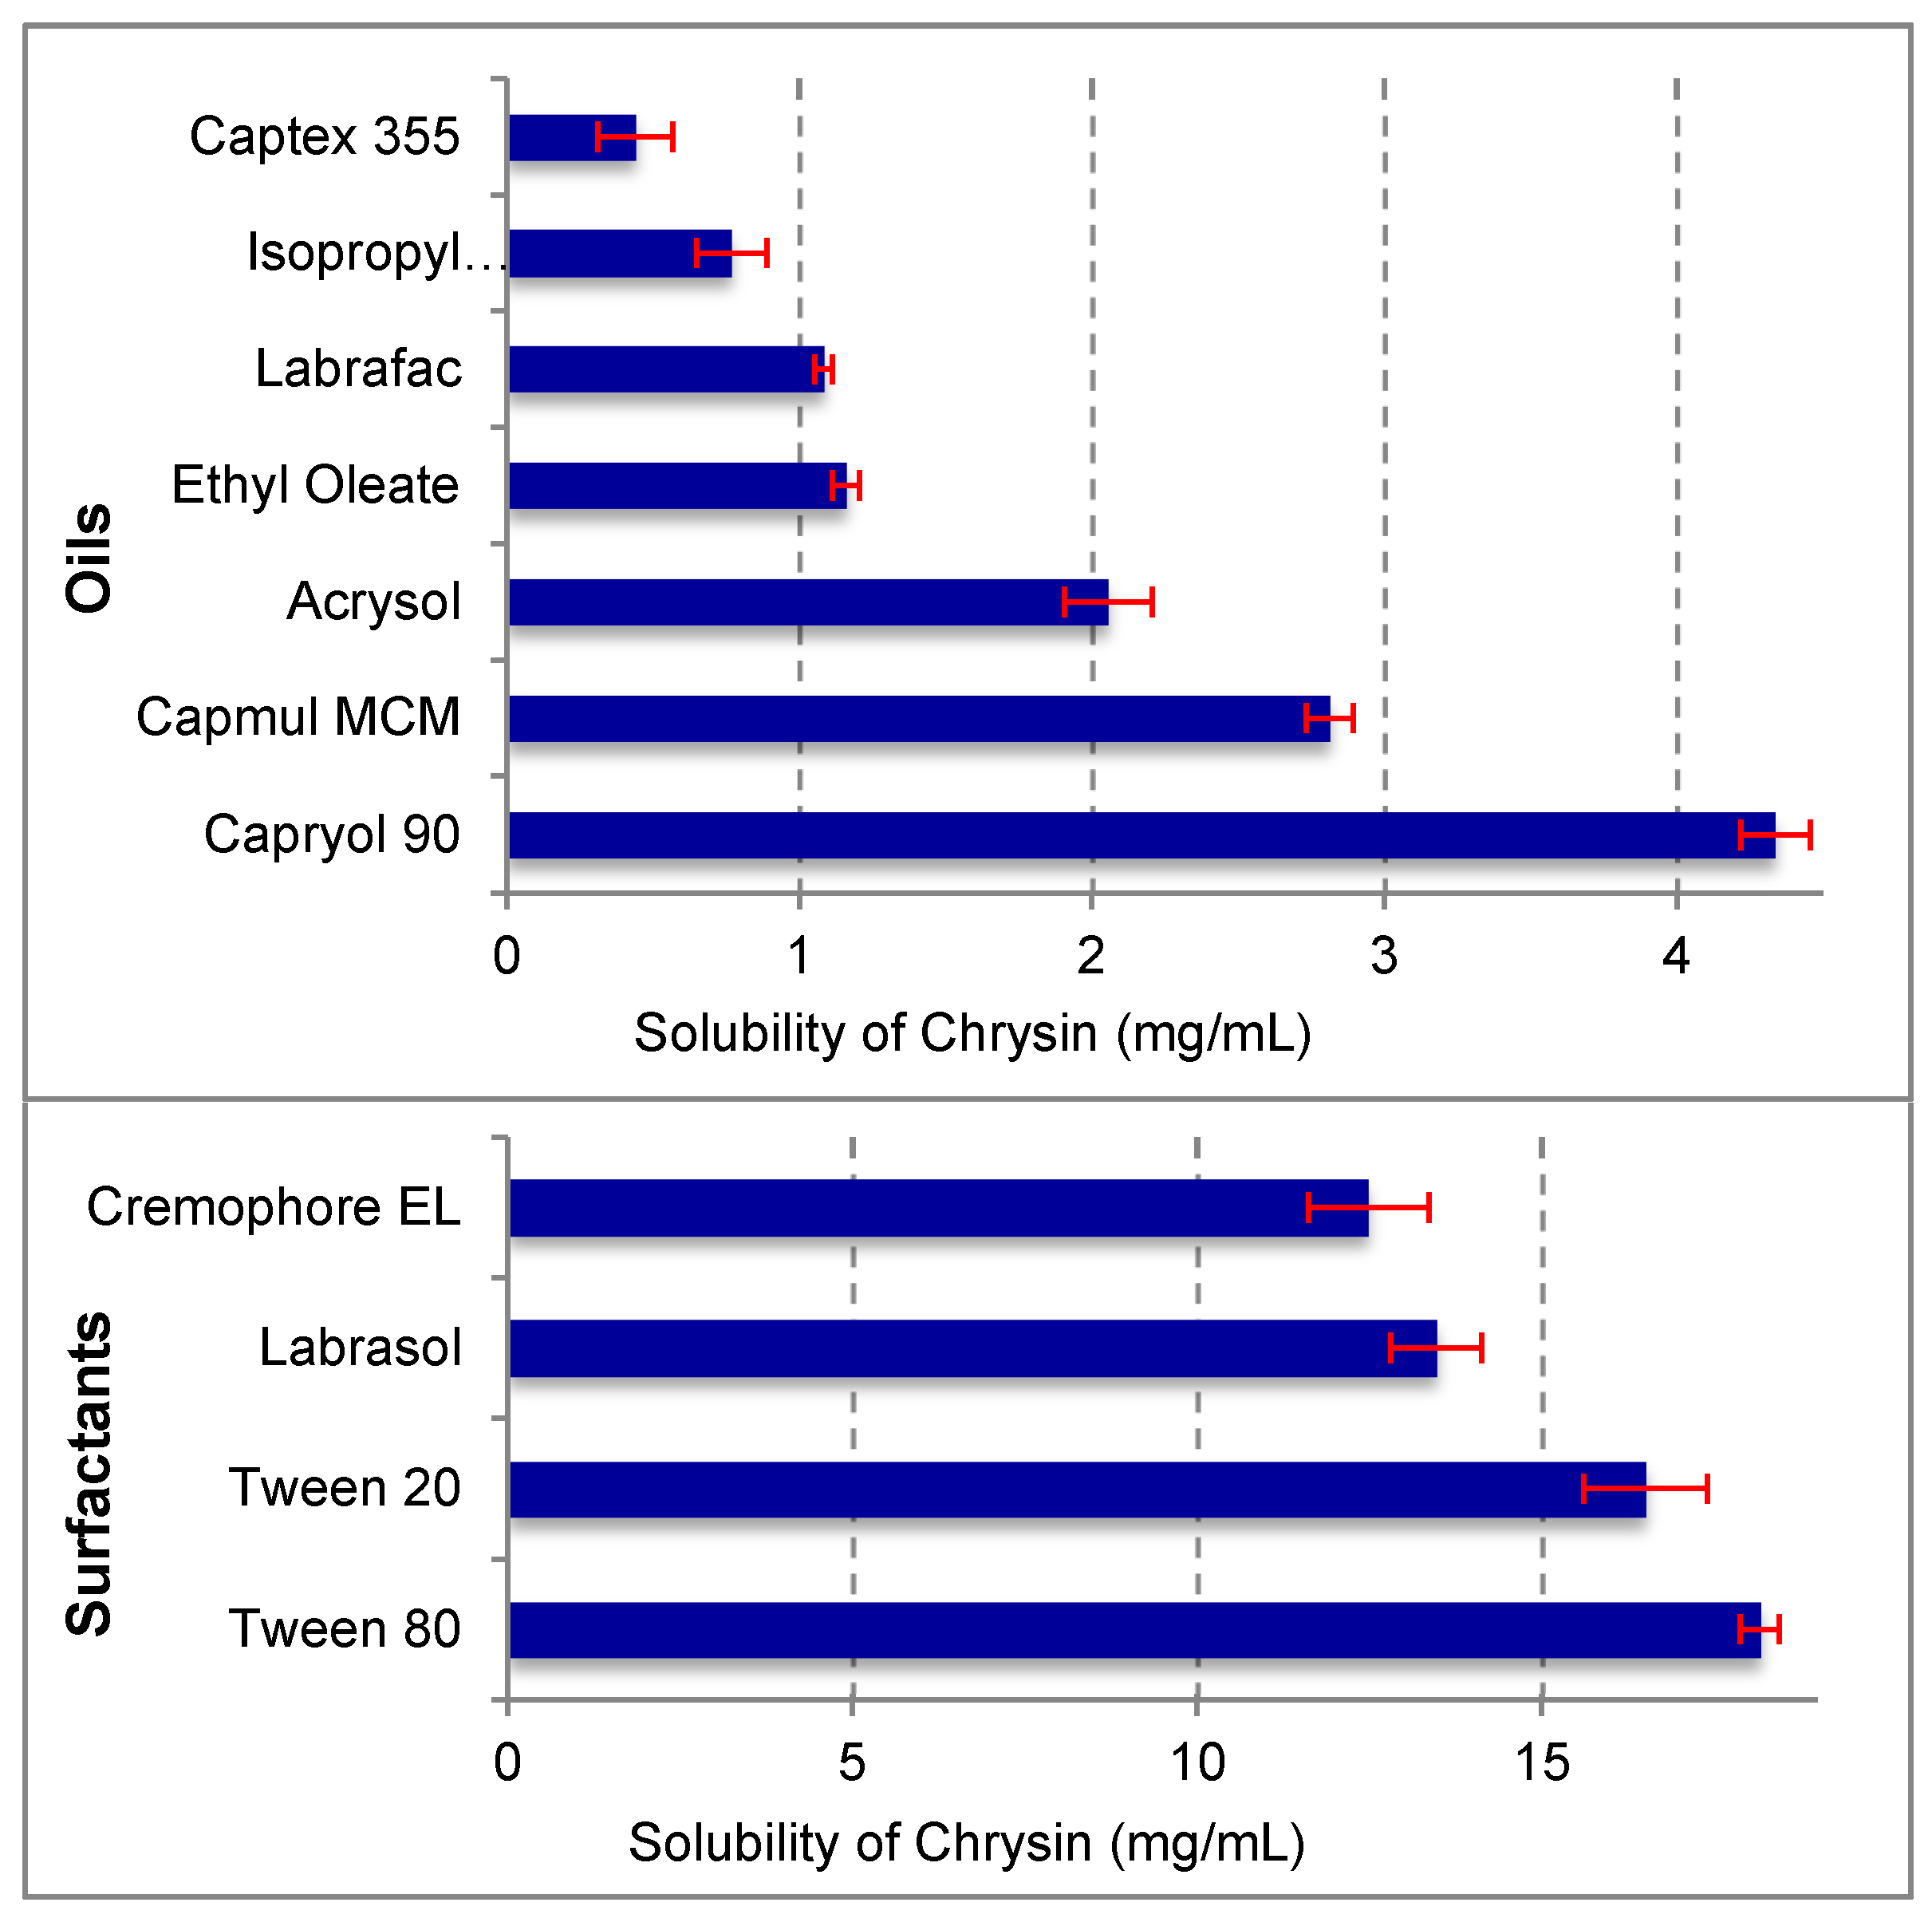 Solubility of chrysin in various oils, surfactants, and co-solvents